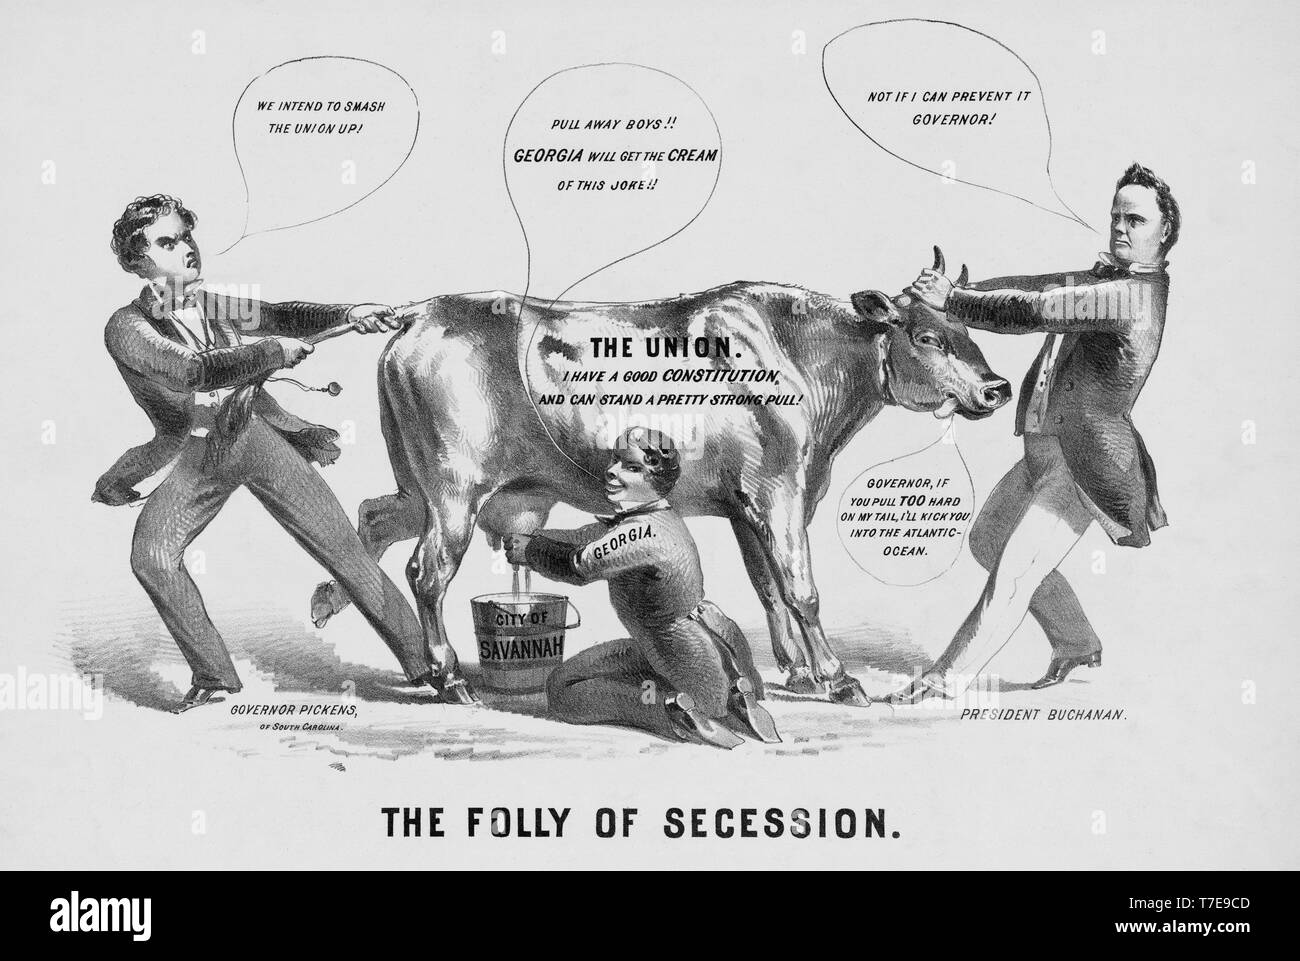 The Folly of Secession, Political Cartoon Featuring U.S. President James Buchanan and South Carolina Governor Francis W. Pickens, Currier & Ives, 1861 Stock Photo